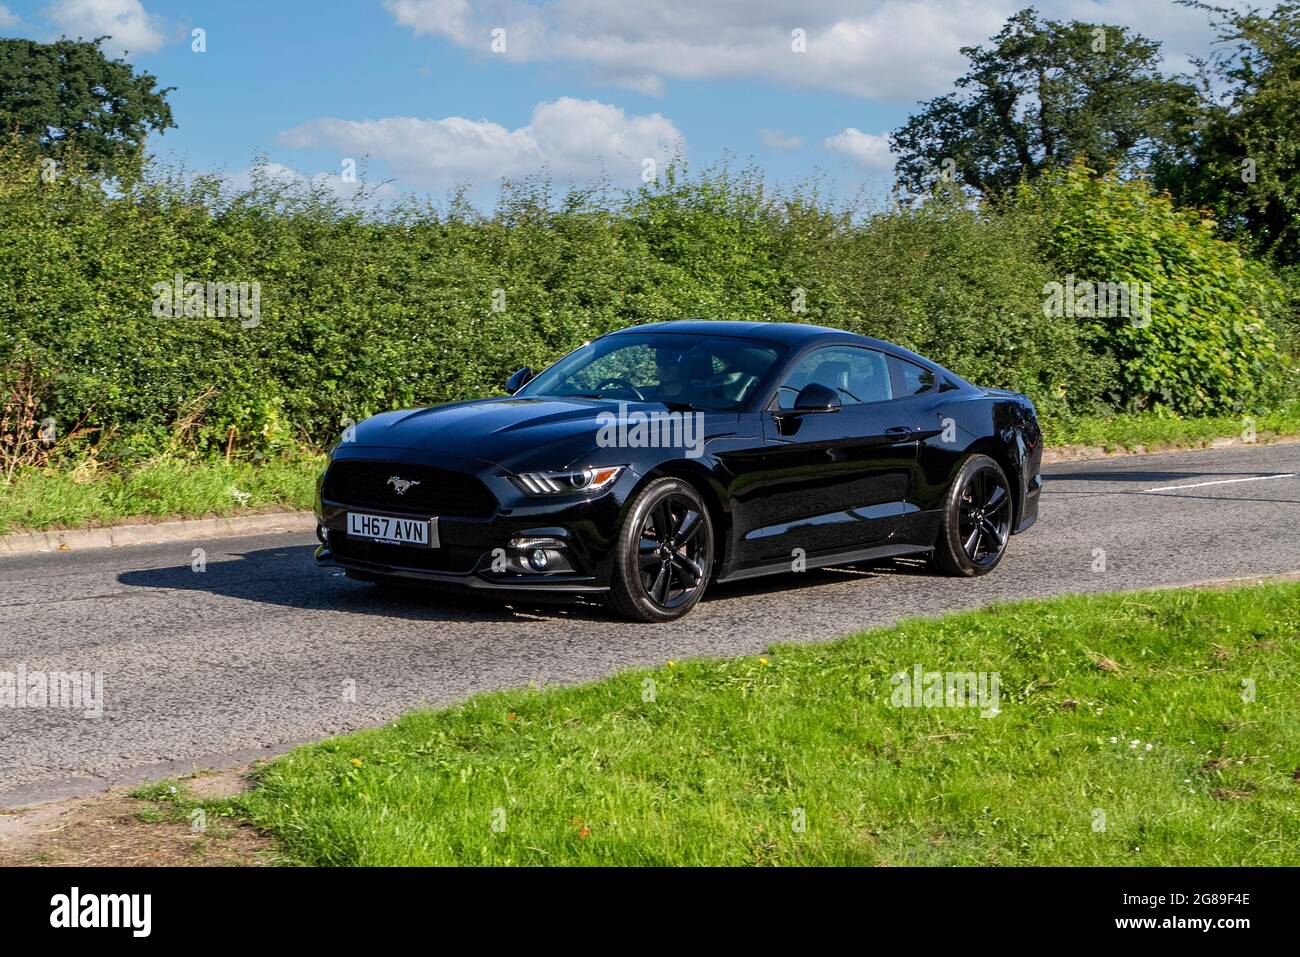 2017 black Ford Mustang 2261 cc petrol 2dr coupe vehicle en-route to Capesthorne Hall classic July car show, Cheshire, UK Stock Photo